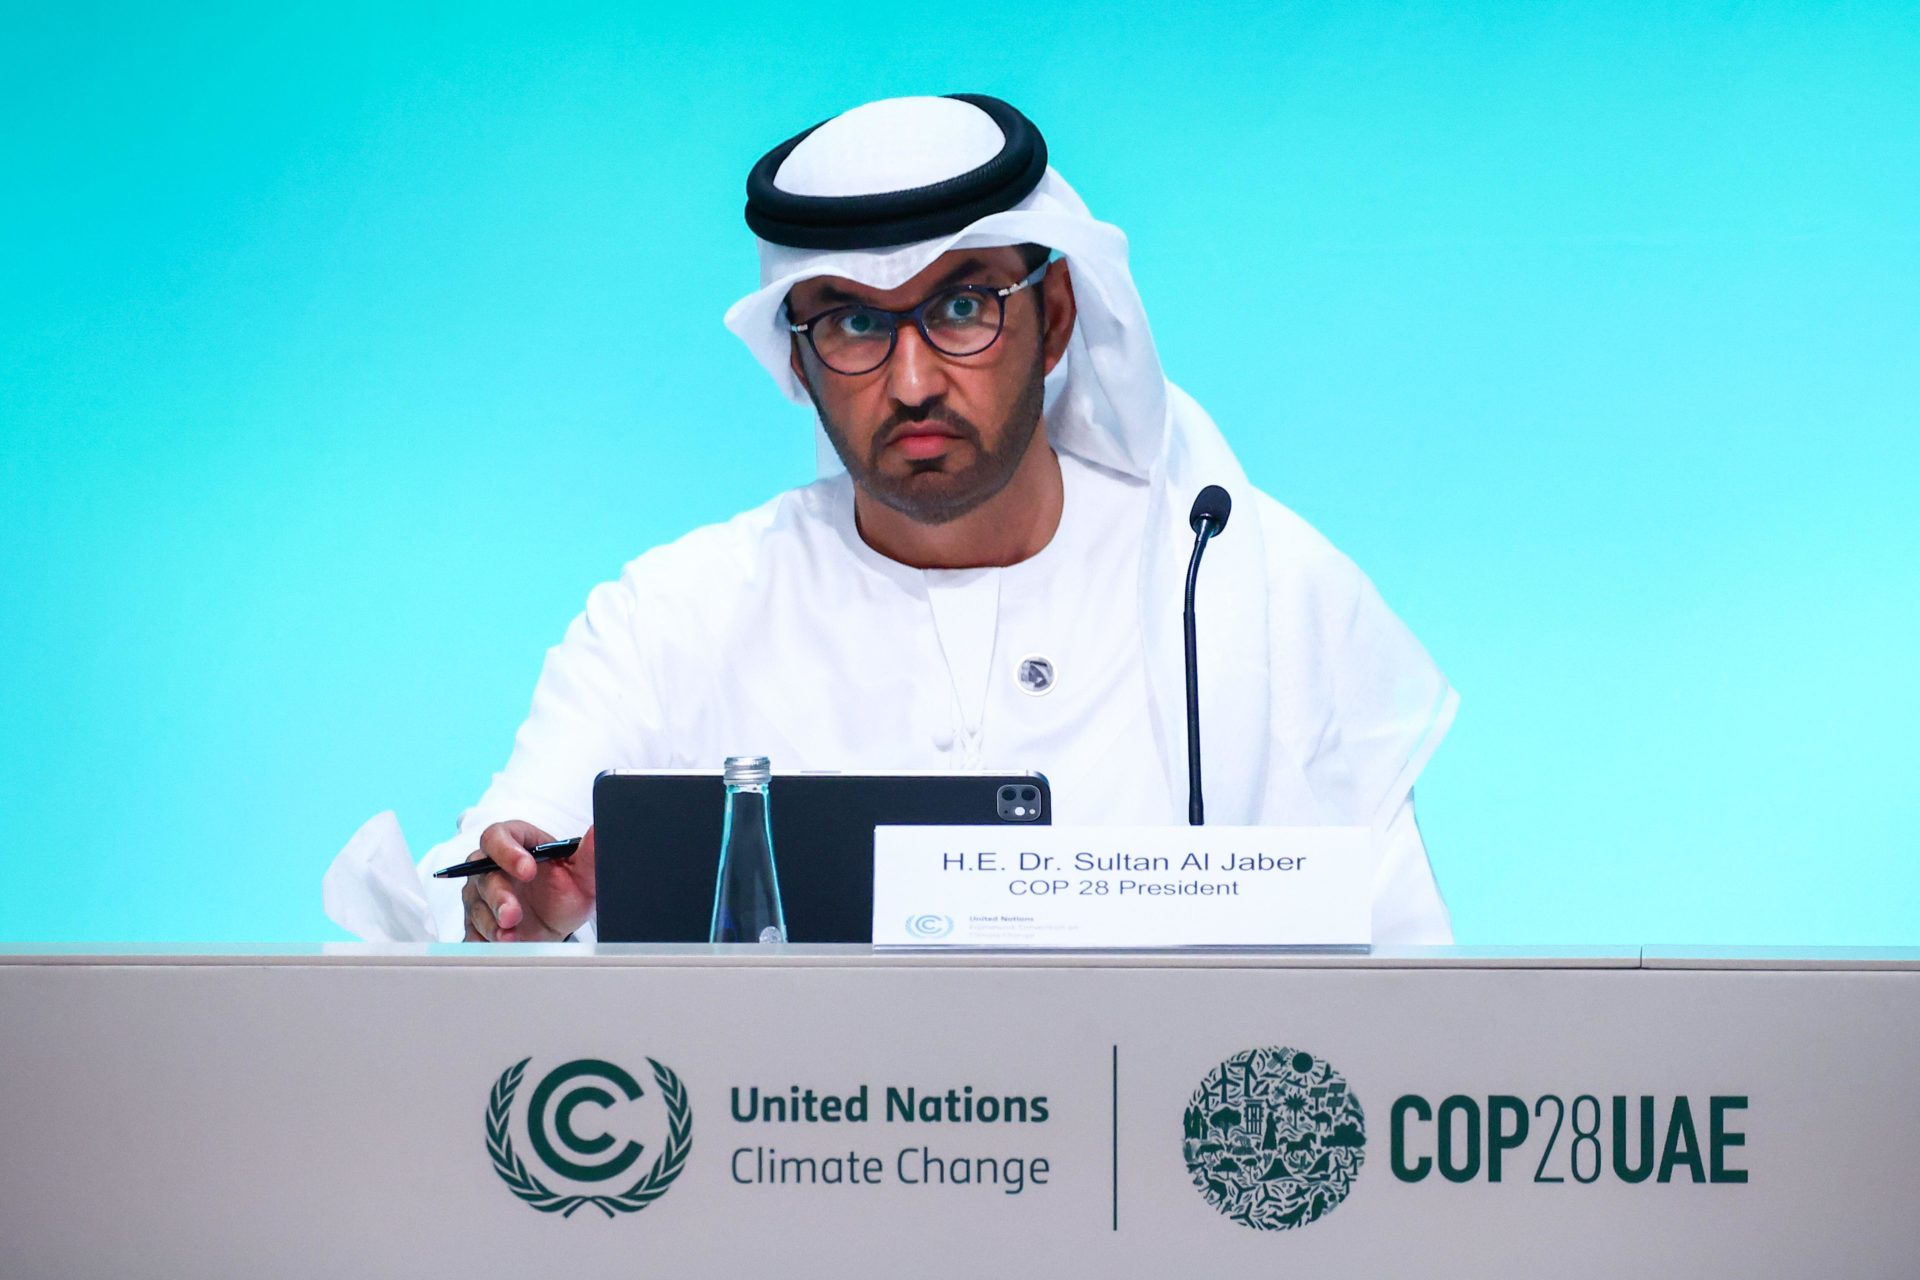 Sultan Ahmed Al Jaber speaks during a press conference at COP28